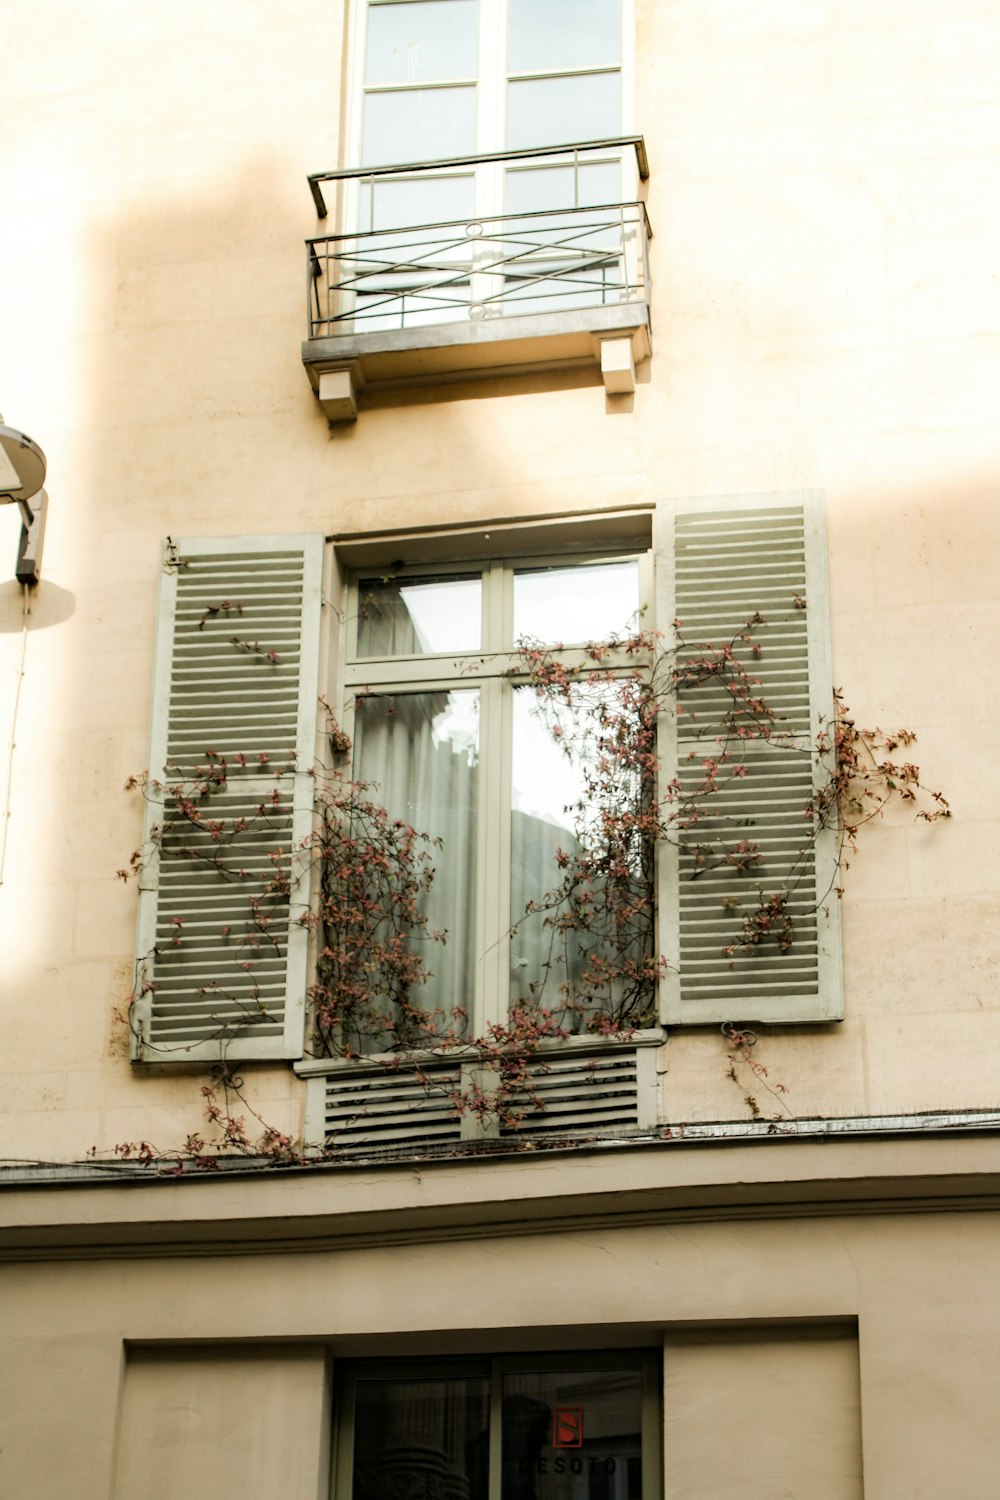 a window with shutters and a balcony above it